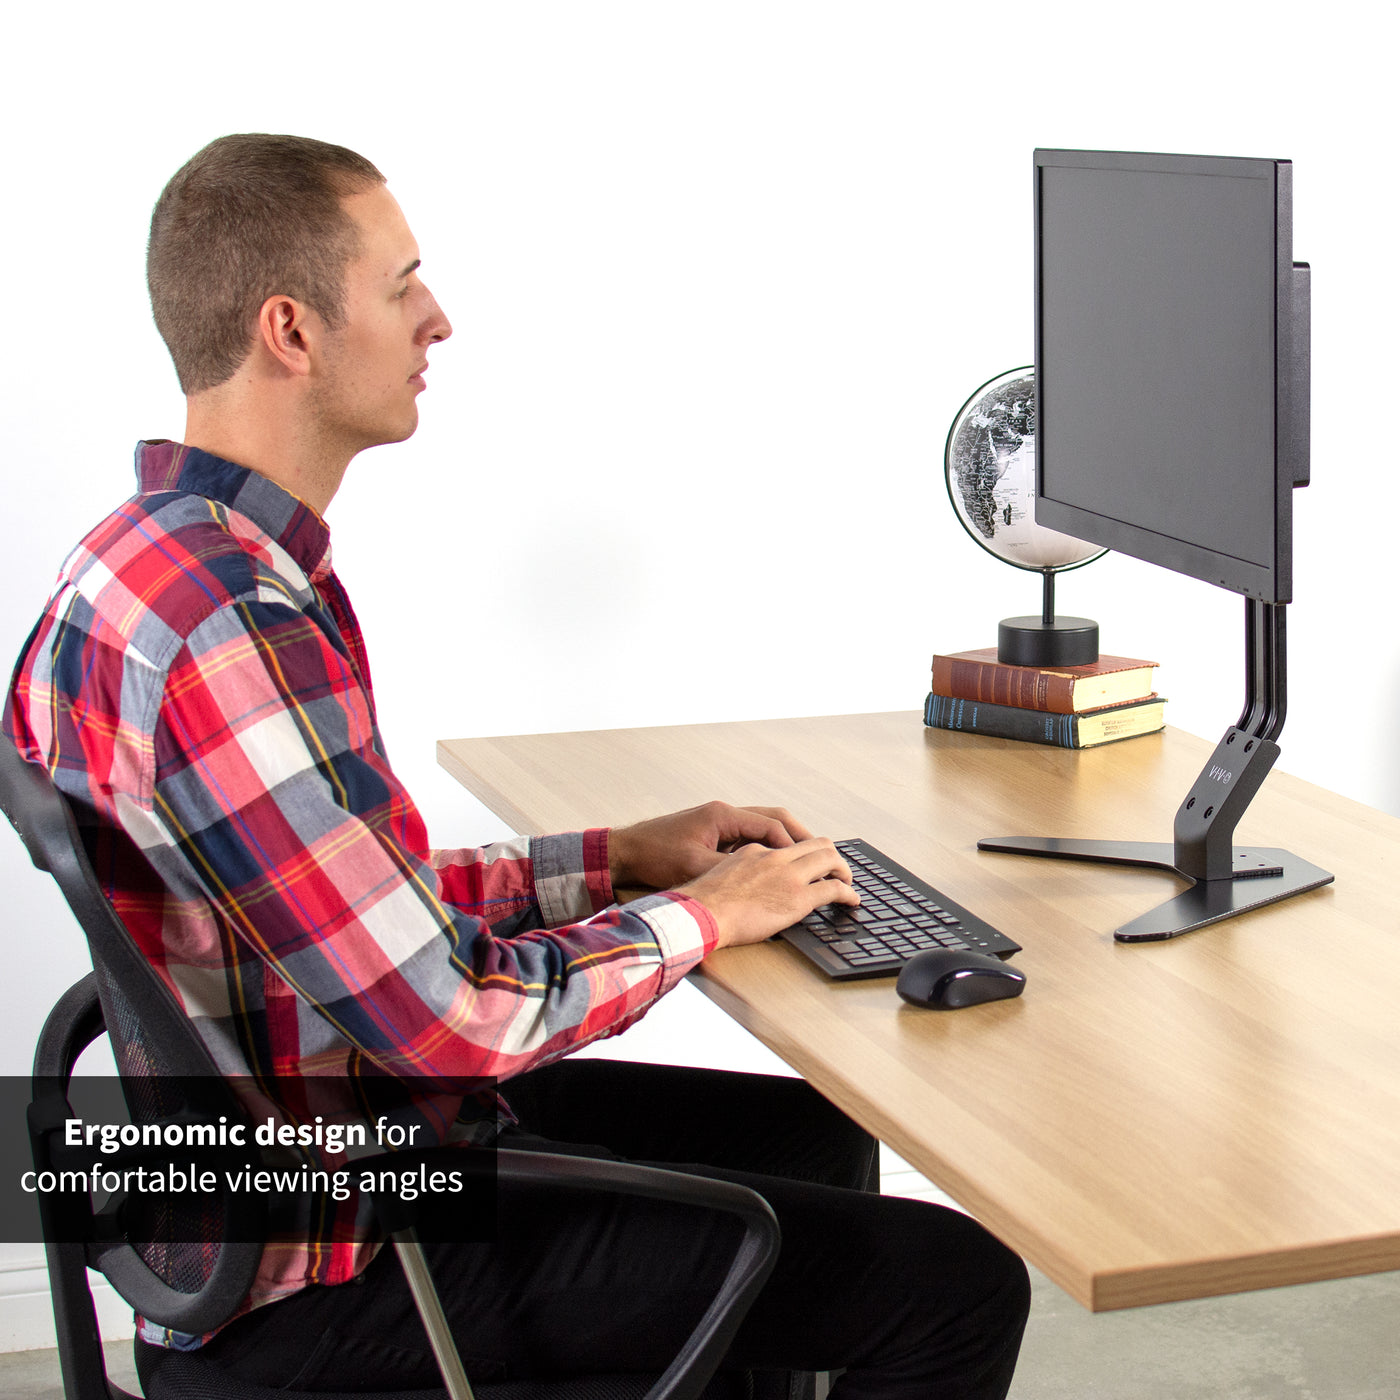 Comfortable viewing provided with an ergonomic design.